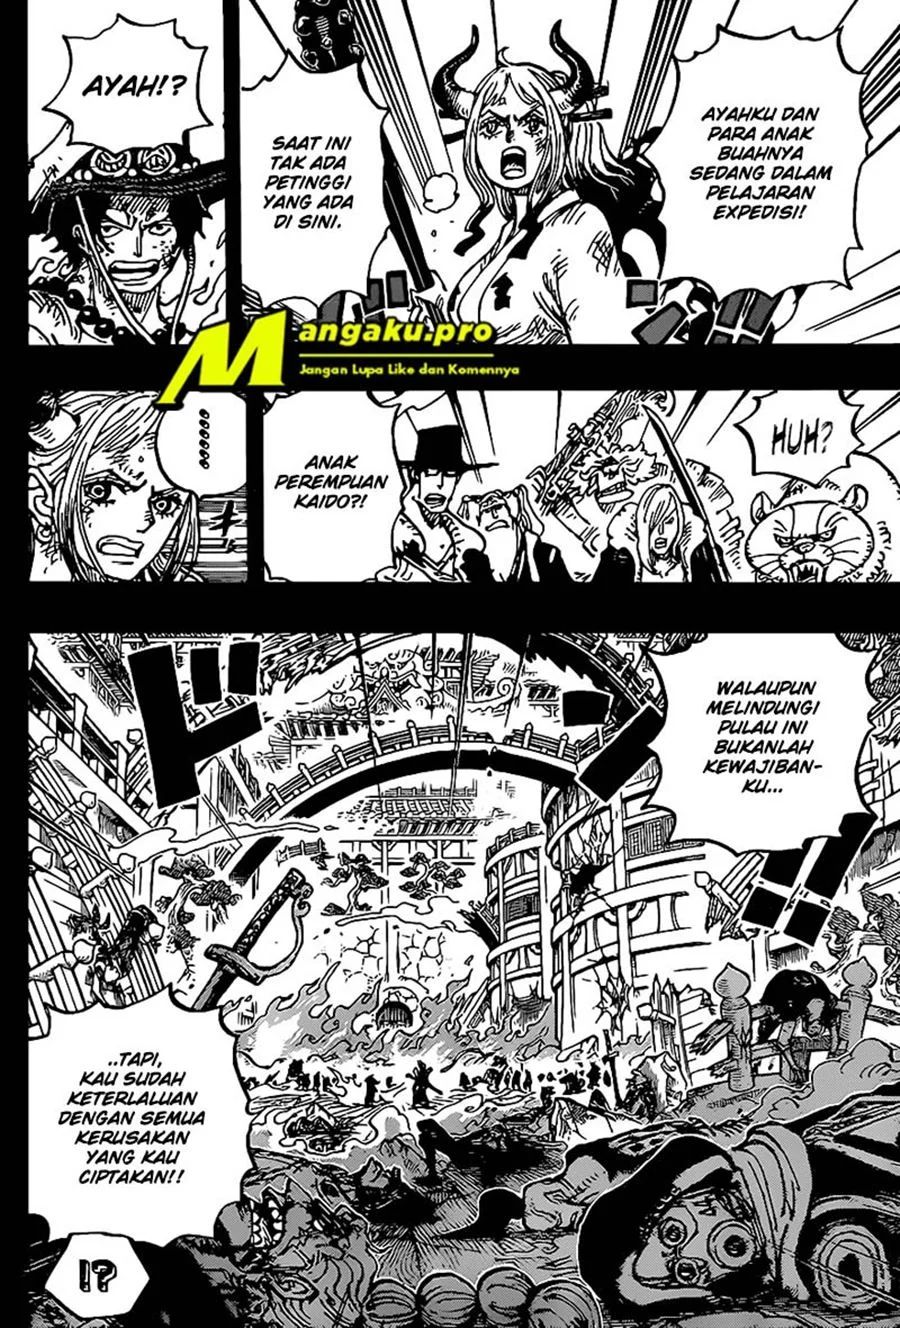 One Piece Chapter 999